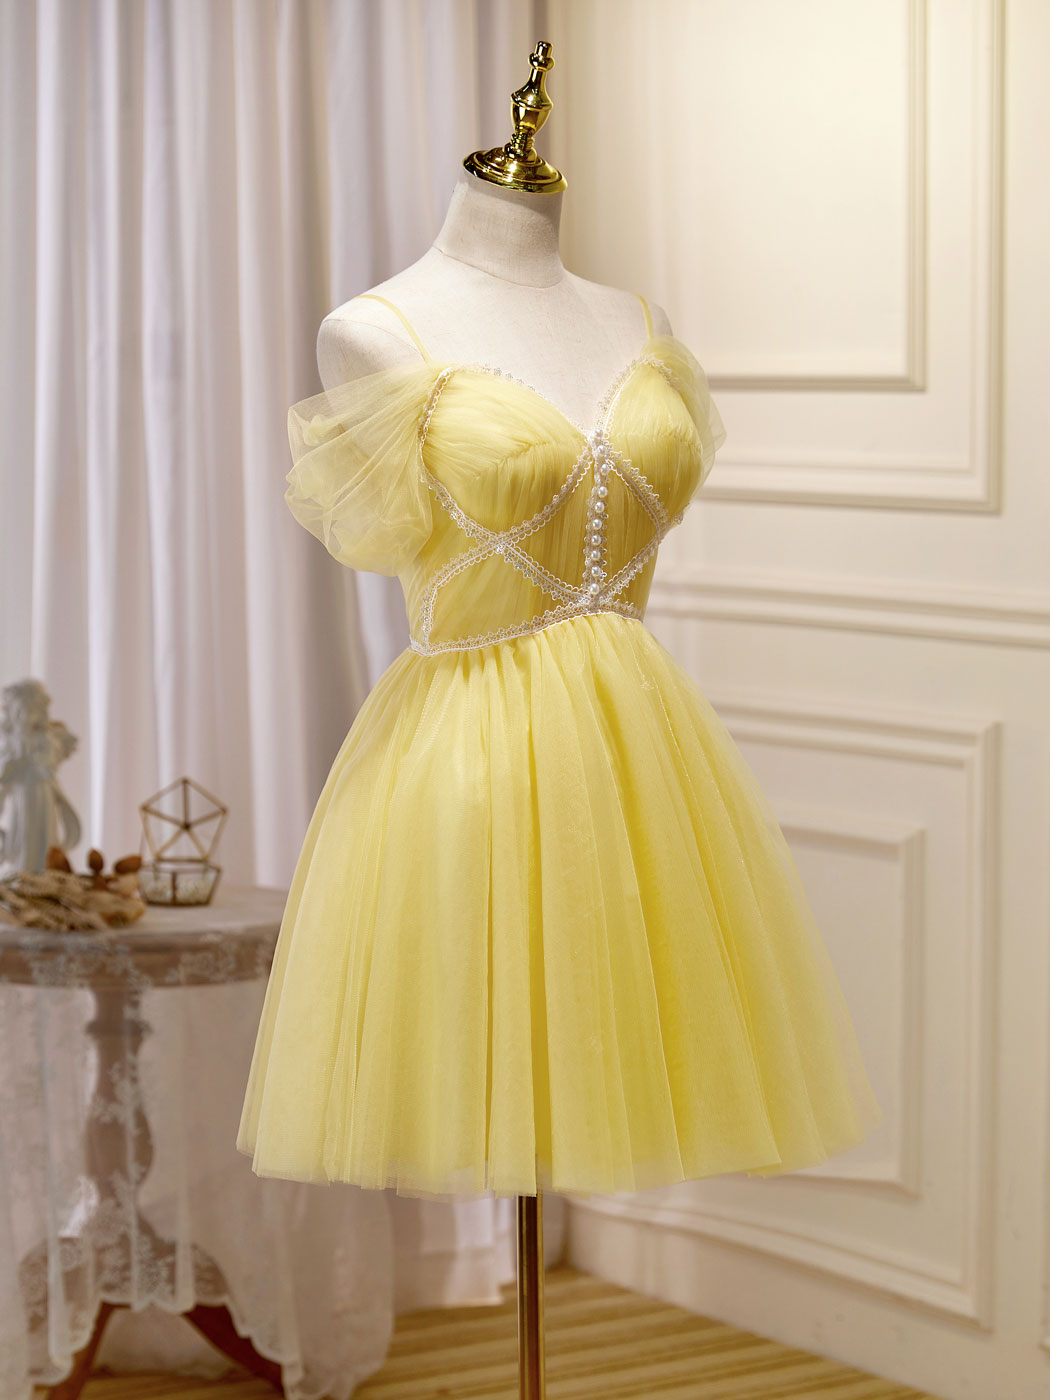 Prom Dresses Suits Ideas, Mini/Short Yellow Prom Dresses, Yellow Cute Homecoming Dress With Beading Lace